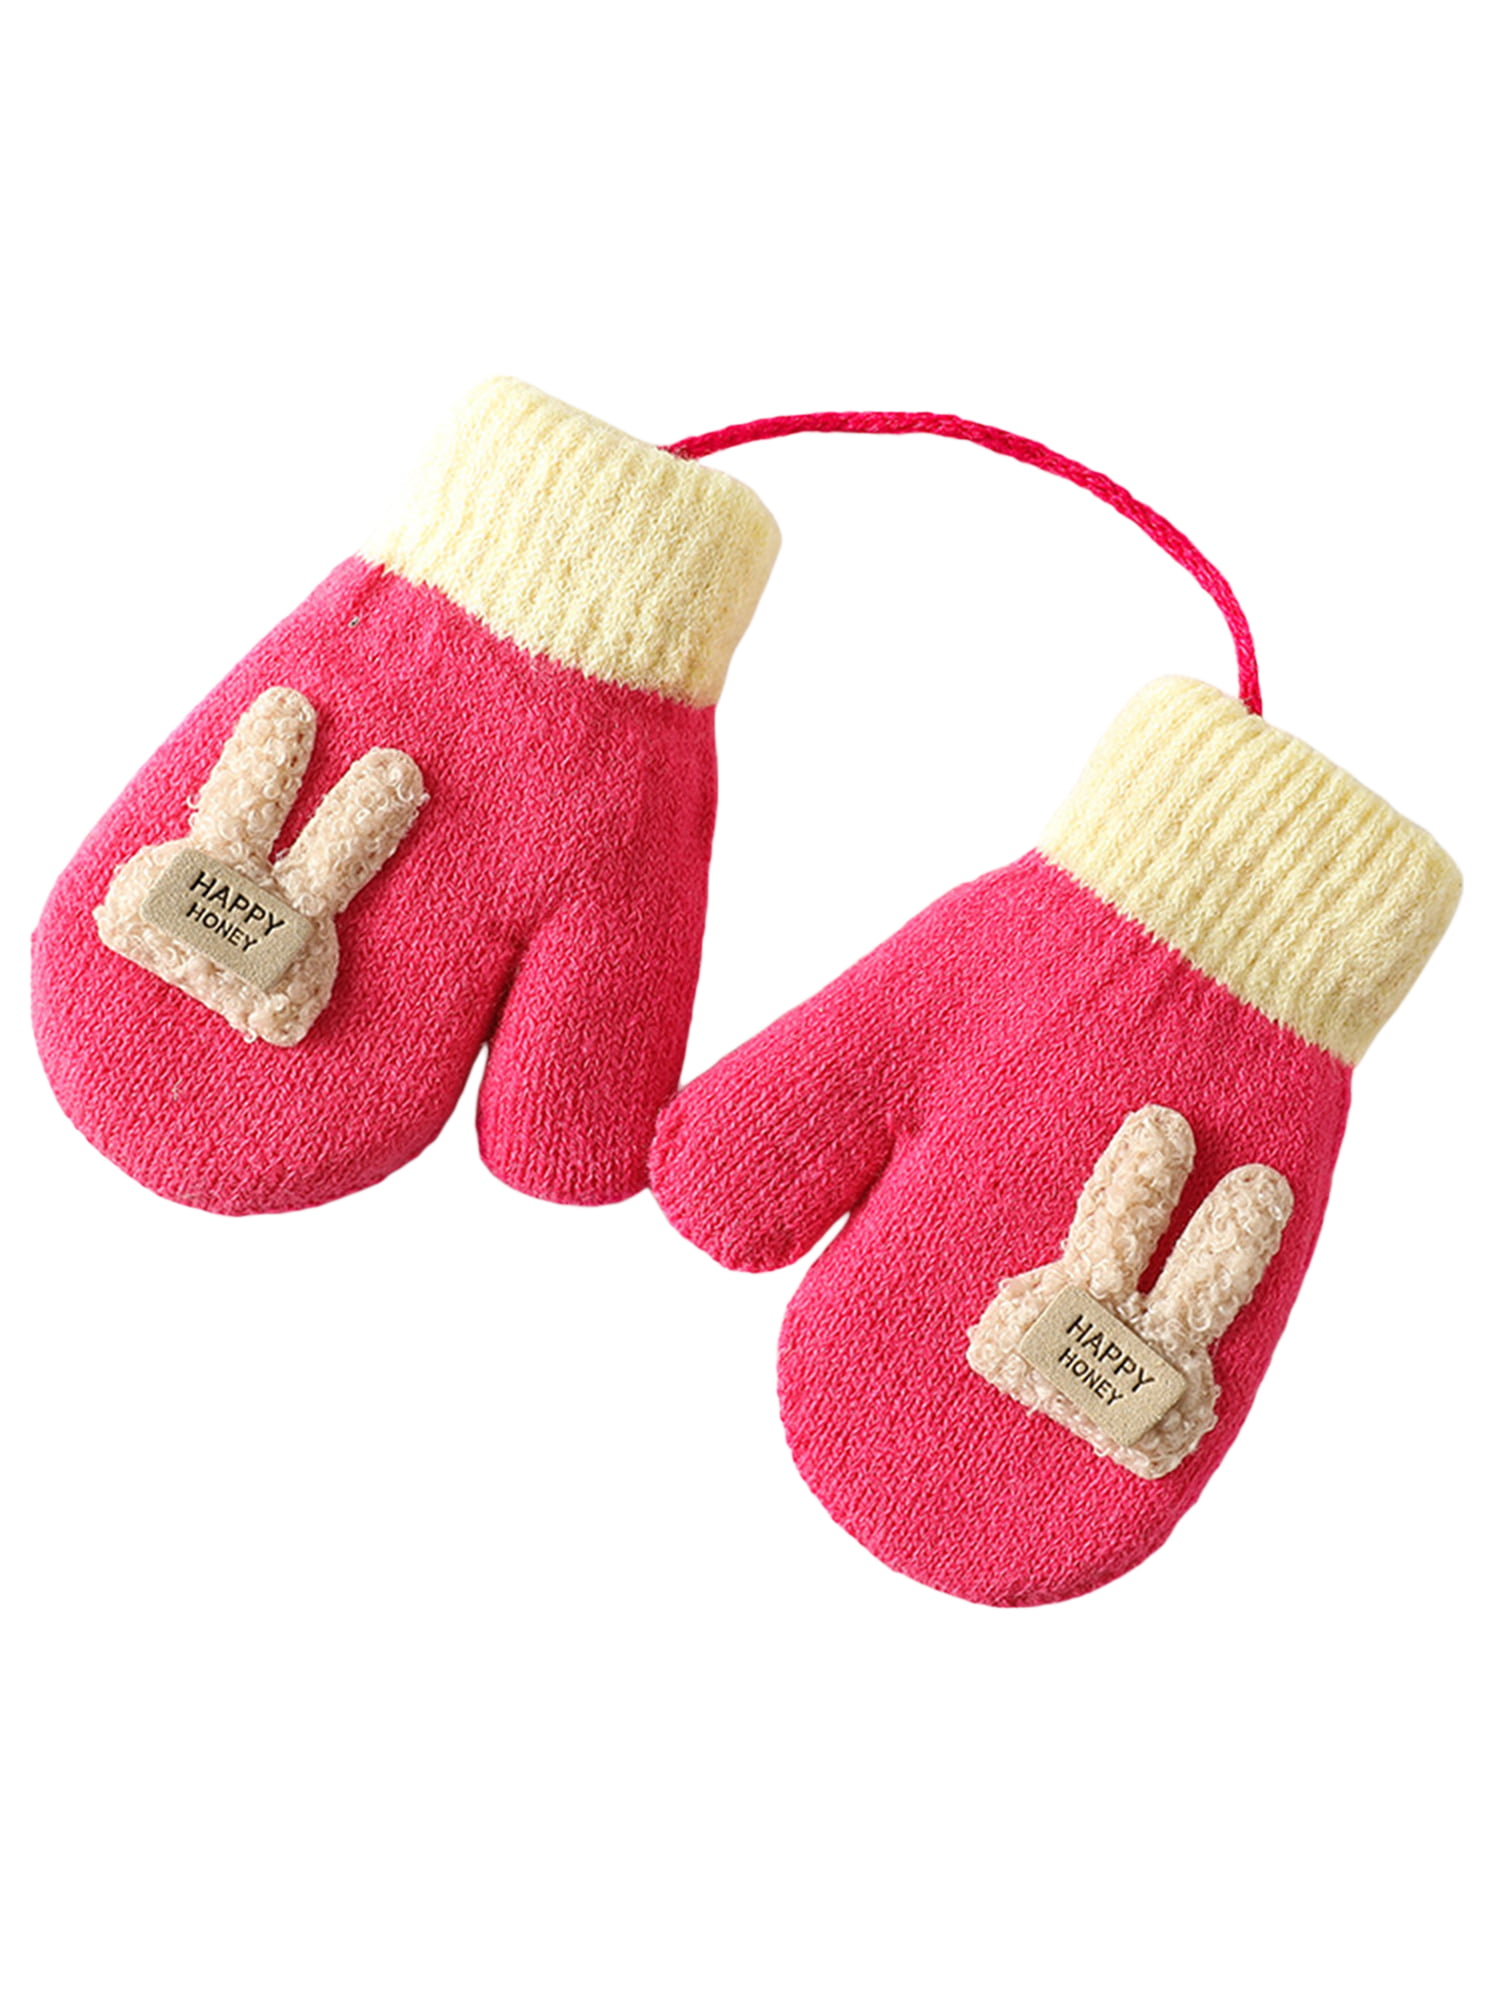 Boys Girls Knit Gloves Winter Plush-lined Cartoon Mittens Gloves with String